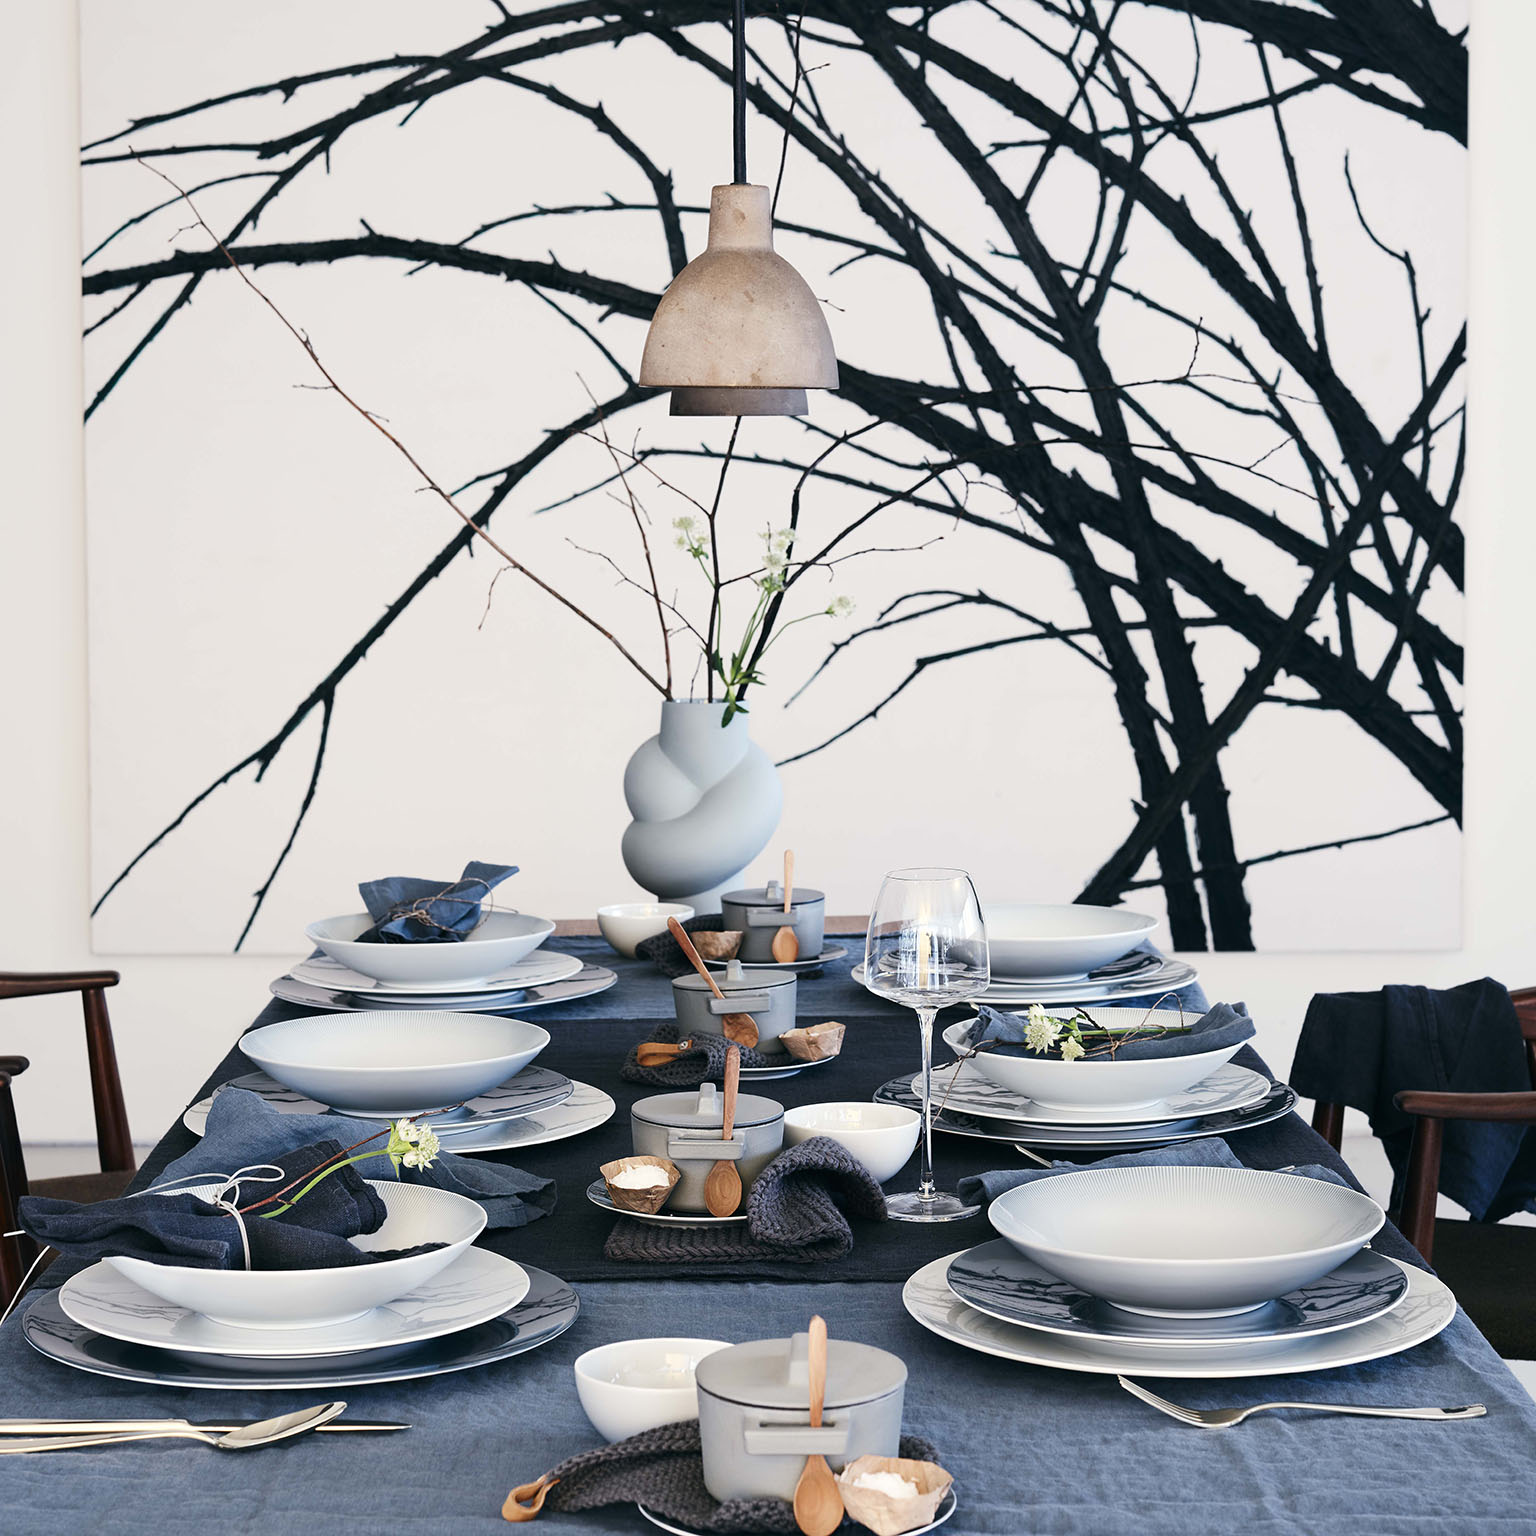 Side view of a fully set table for six with TAC Sensual dinner and soup plates, linen napkins, table accessories, a Node vase and large picture in the background.